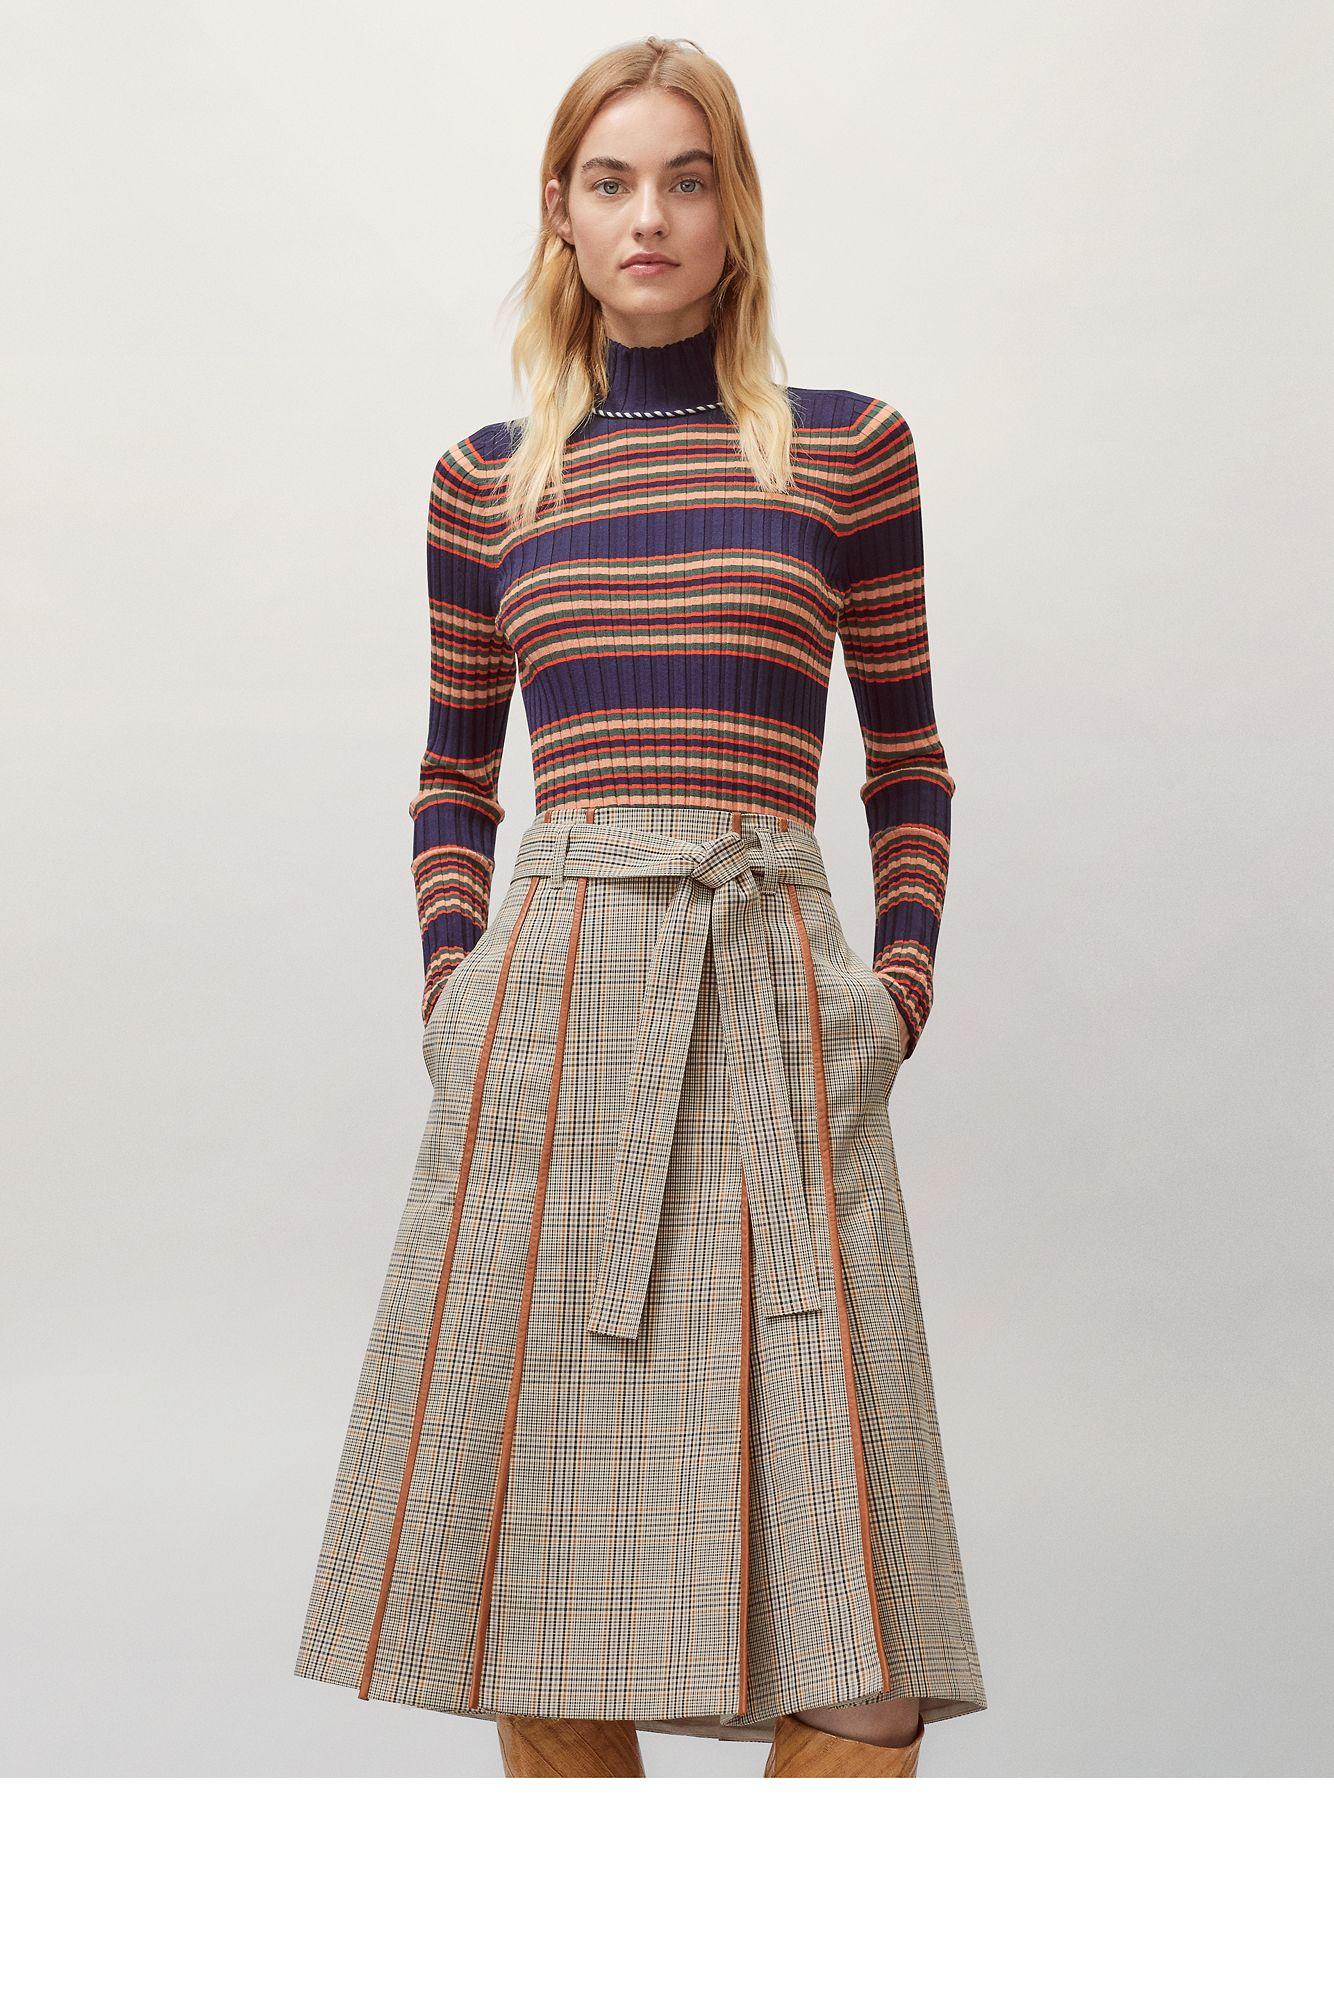 Tory Burch Plaid Pleated Skirt in Natural - Lyst